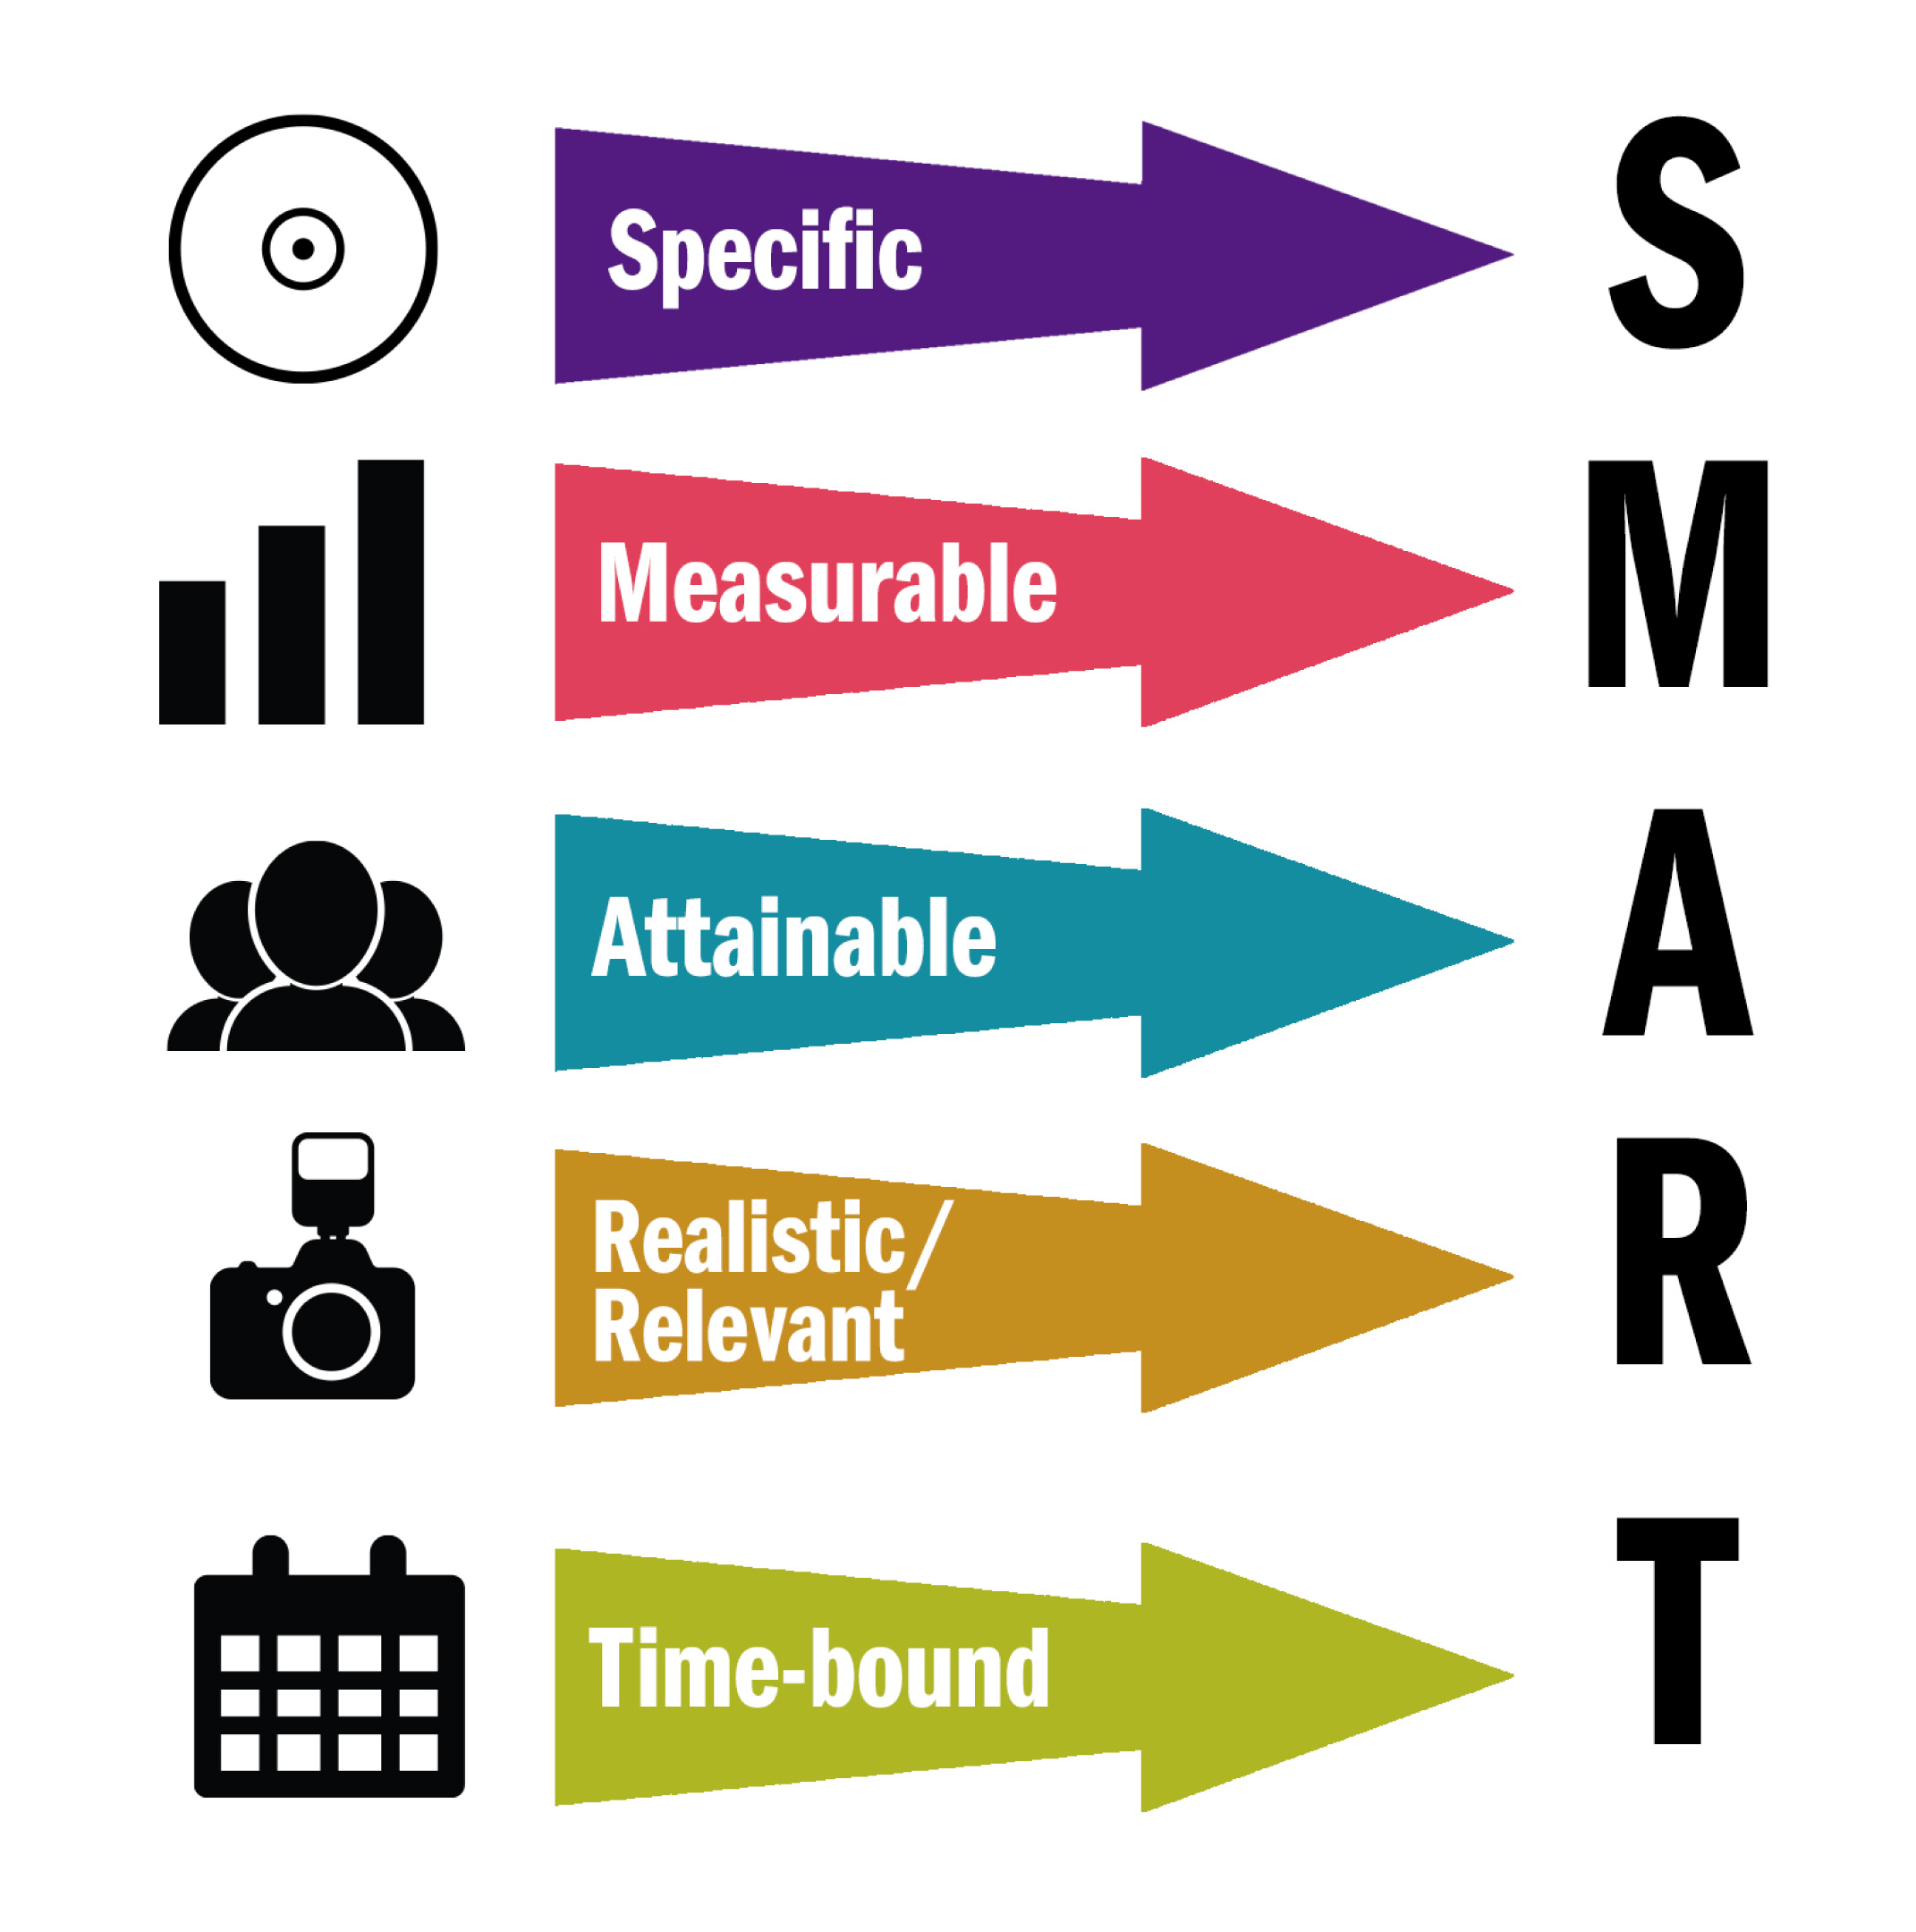 An infographic of SMART goals. Specific, Measurable, Attainable, Realistic/Relevant, Time-bound.